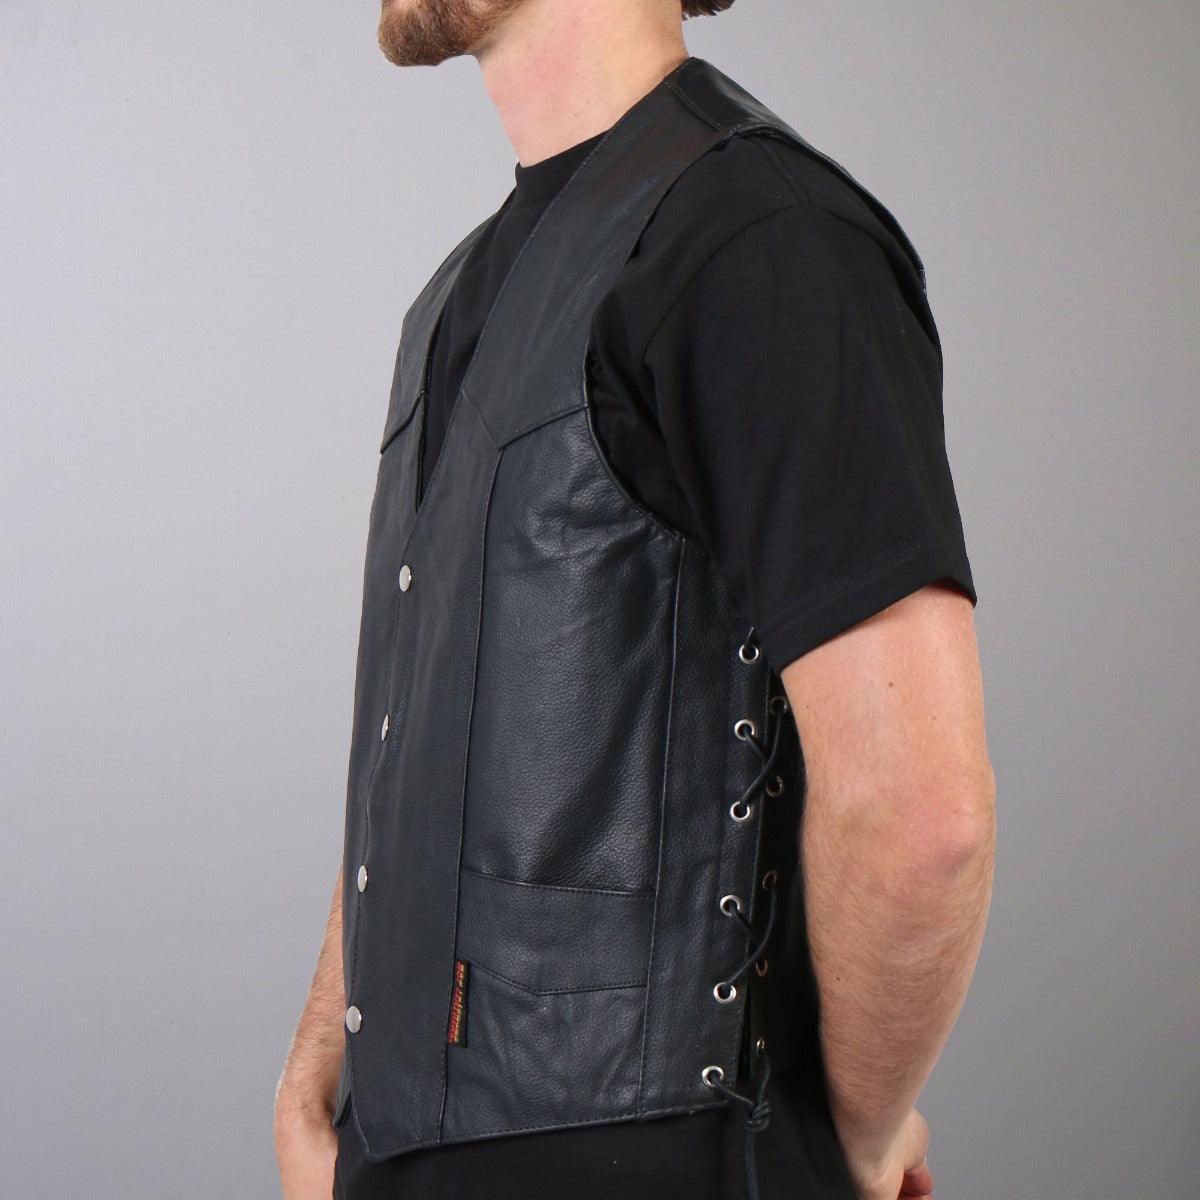 Hot Leathers Men's Concealed Carry Leather Vest - American Legend Rider